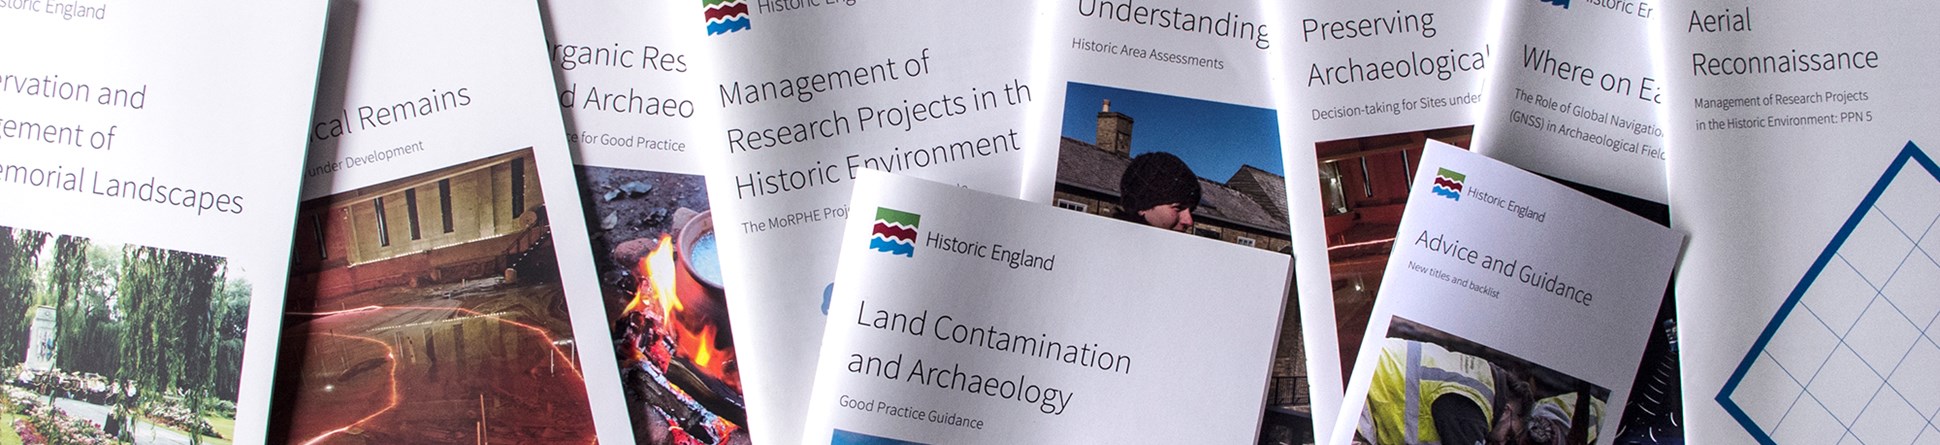 Front covers of Historic England advice and guidance documents